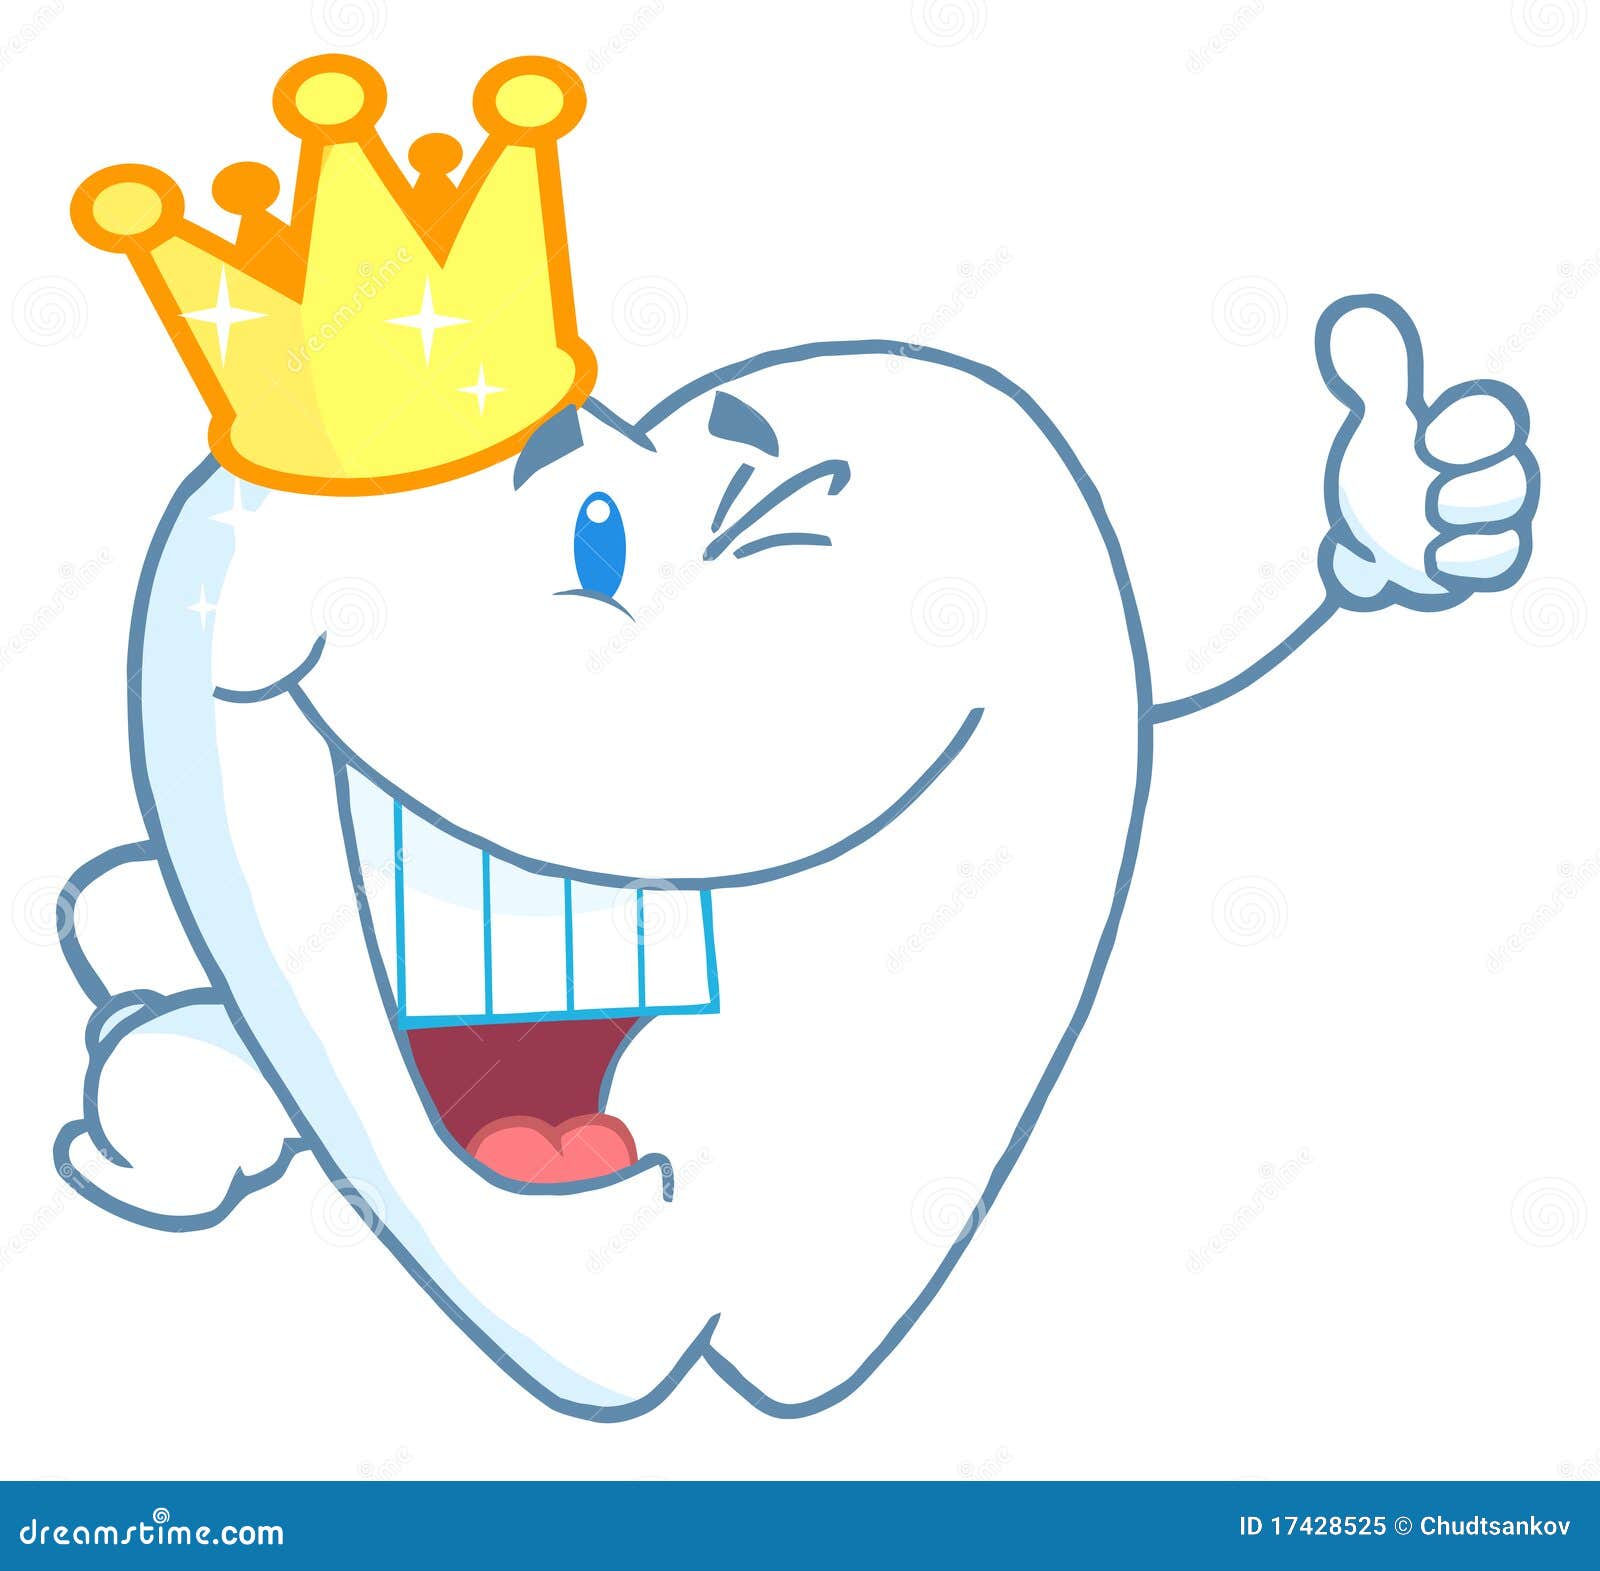 tooth crown clip art - photo #4